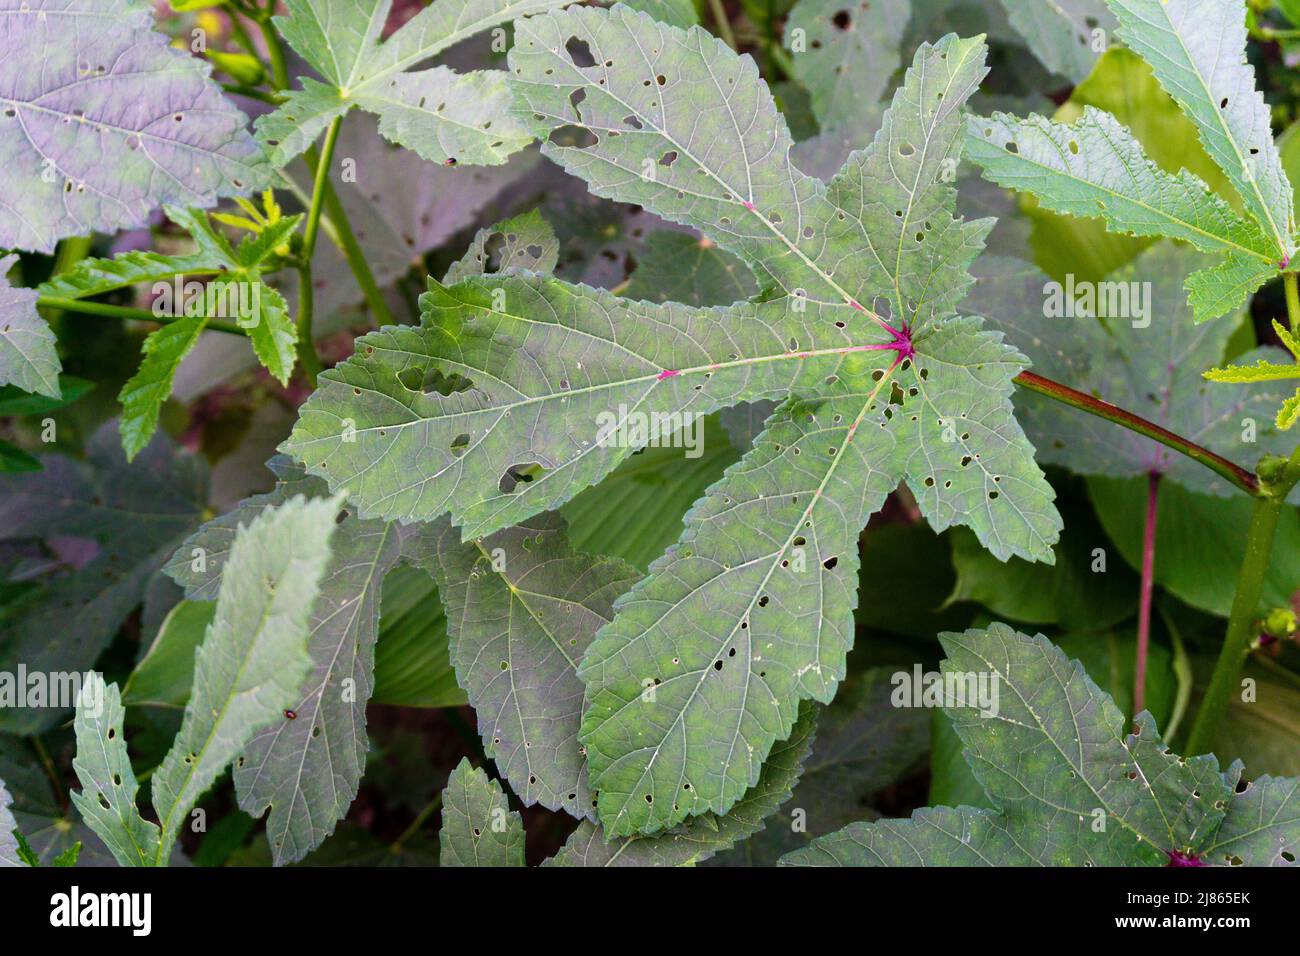 A close up shot of leaves of okra plant in an organic Indian garden. Okra or Okro, Abelmoschus esculentus, commonly known as ladies fingers or ochro. Stock Photo